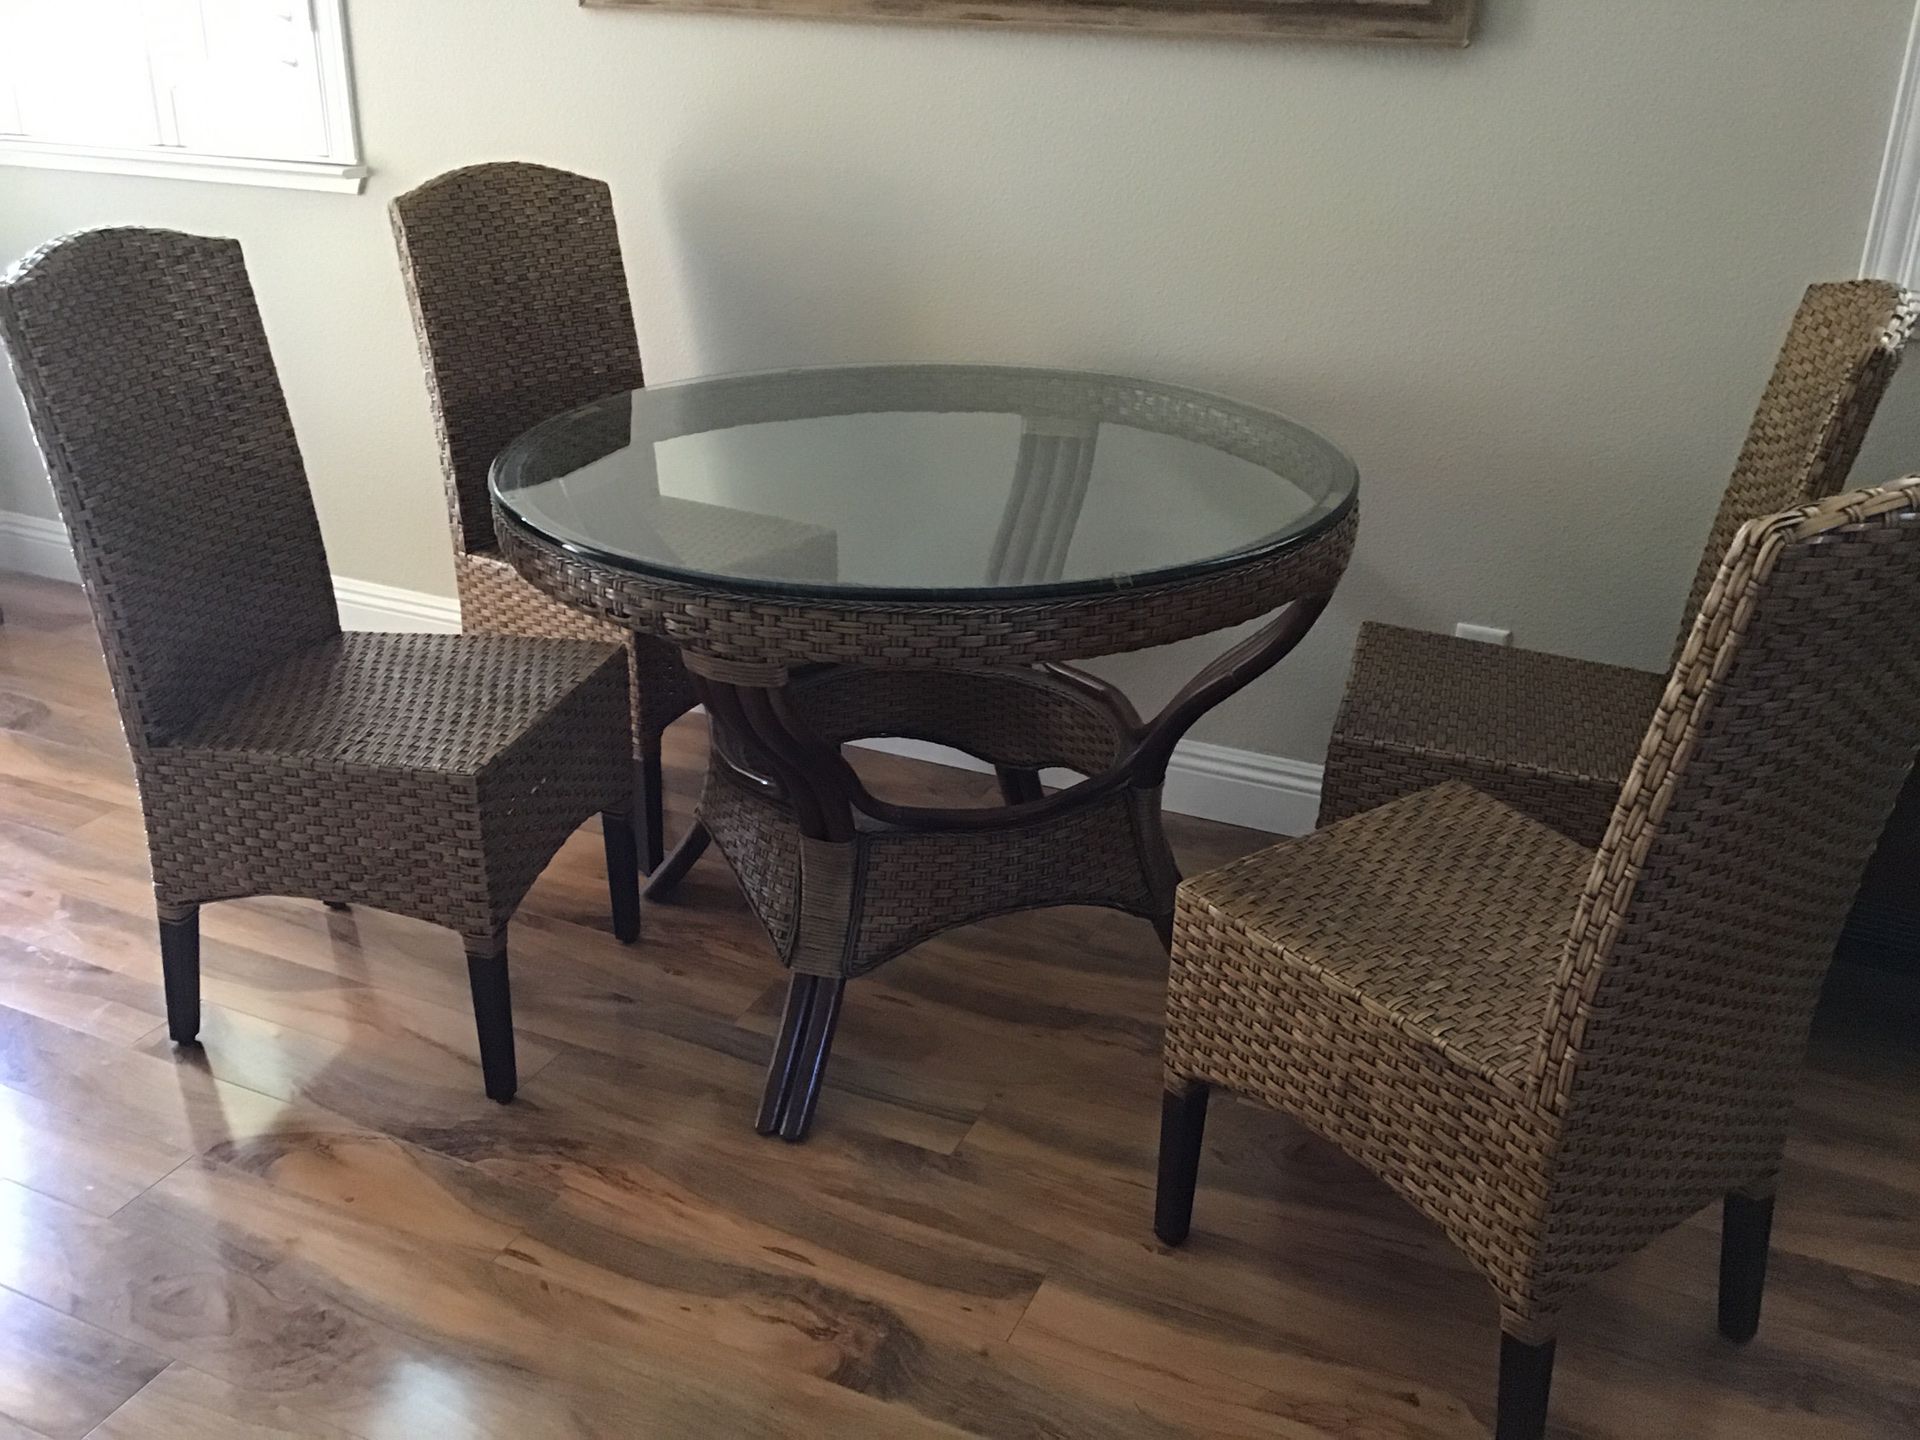 Pier one kitchen table